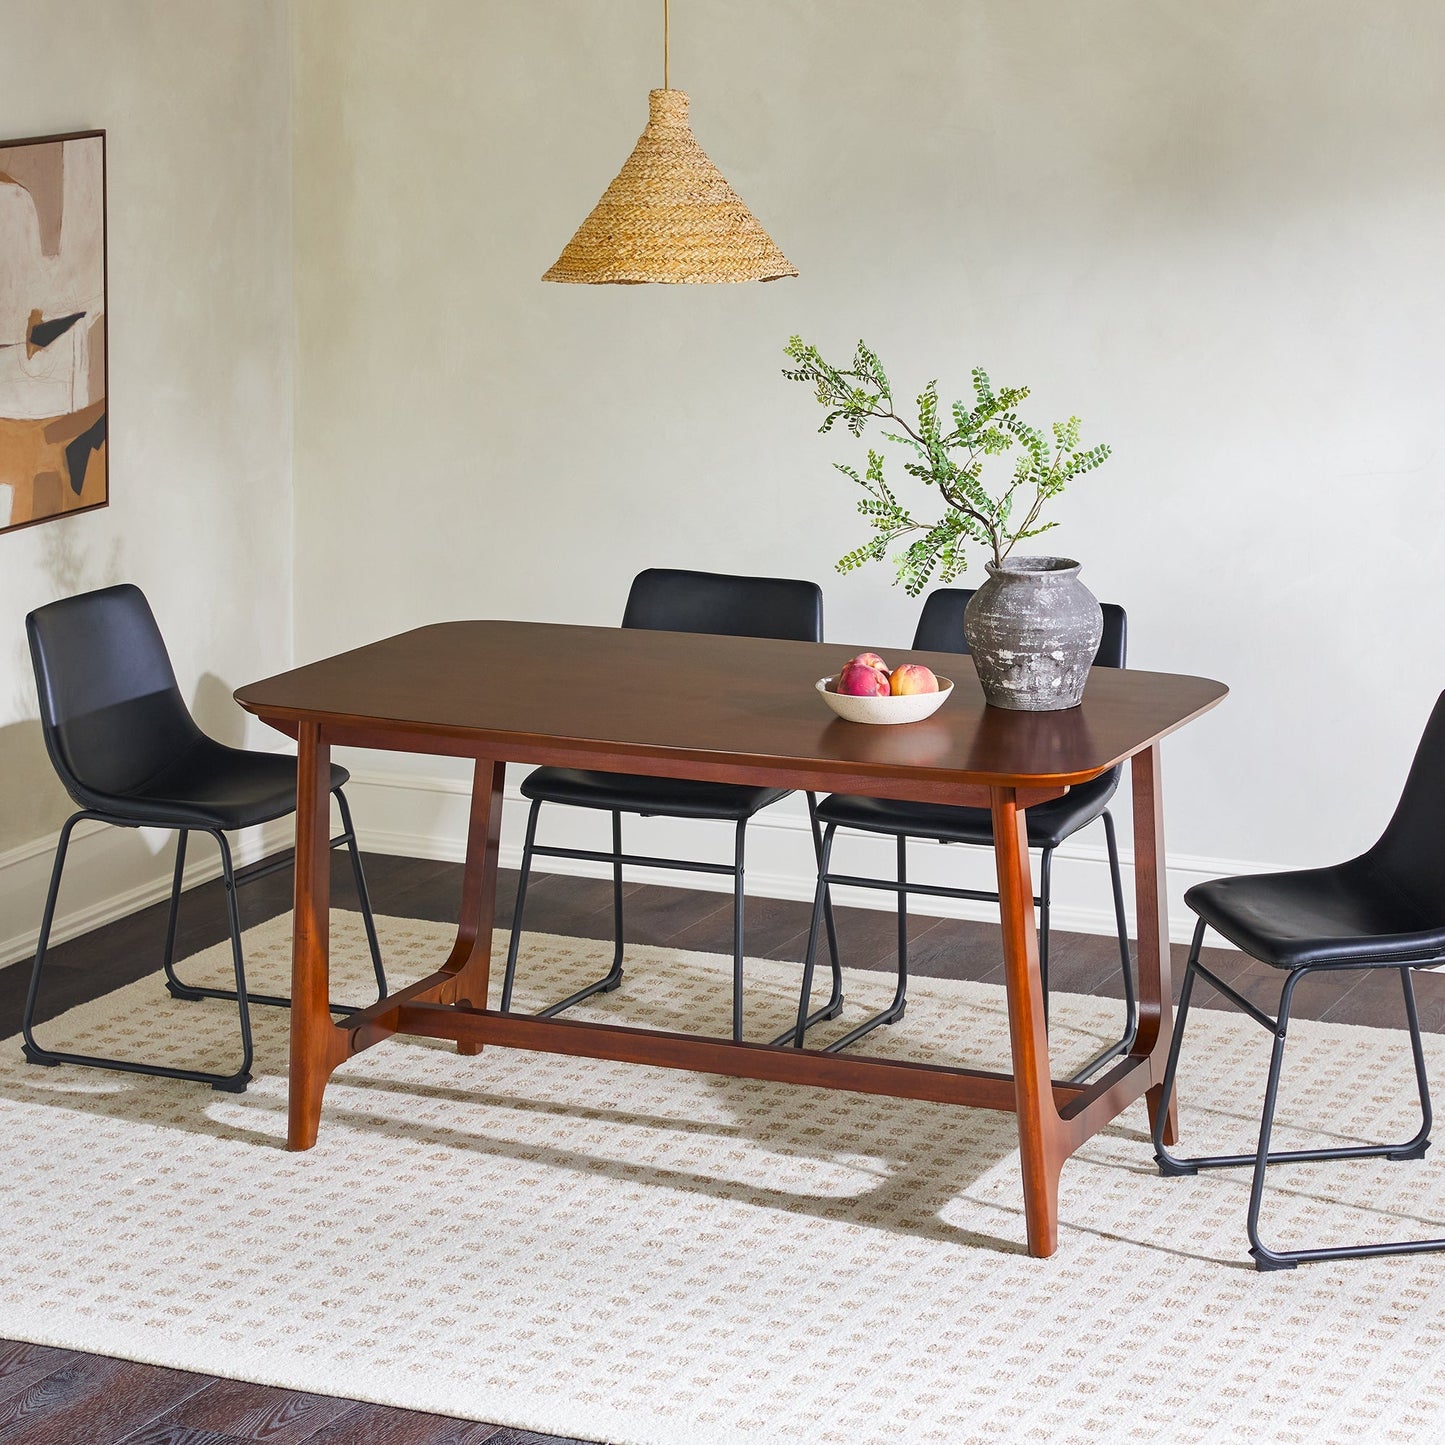 Sammen 60" Mid-Century Dining Table with Trestle Base